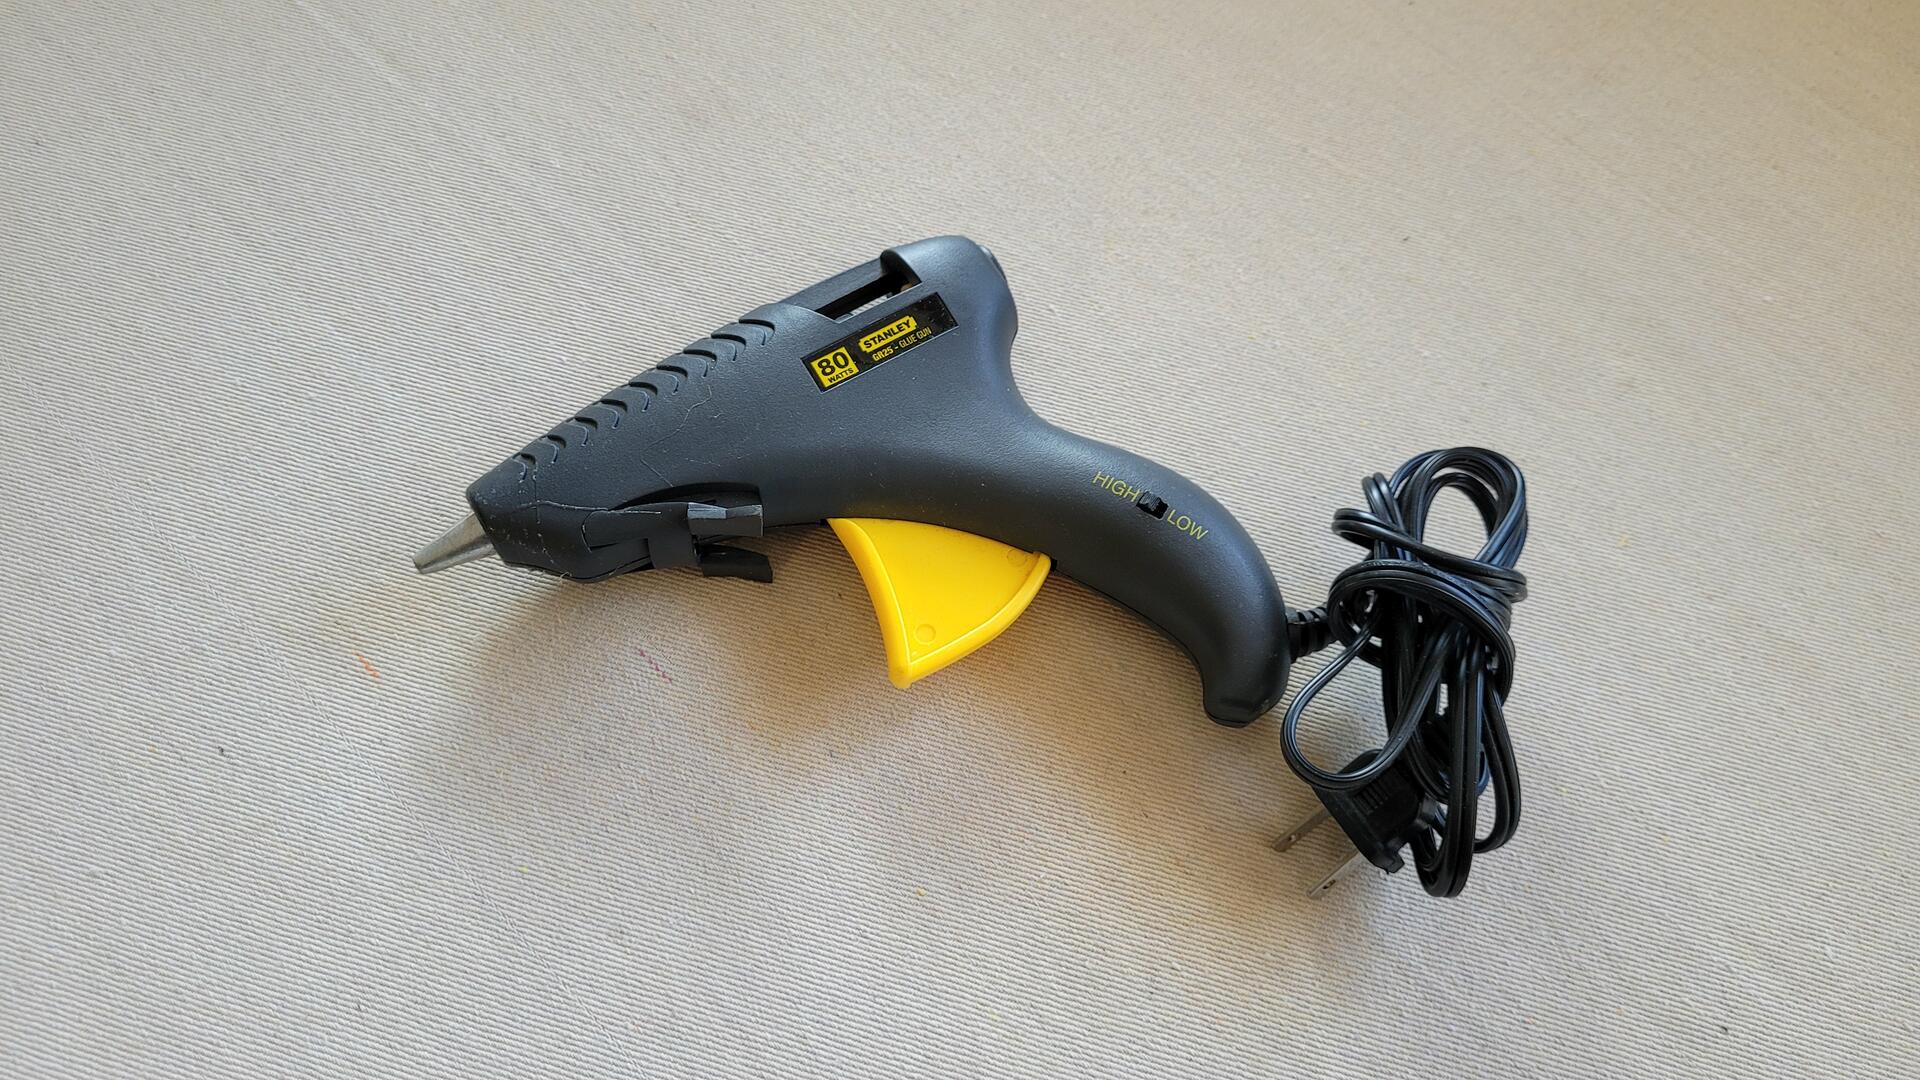 Stanley Dualmelt 80W trigger feed glue gun with the versatility of high and low temperature gluing in one hot melt gun w fold-out stand for handy storage